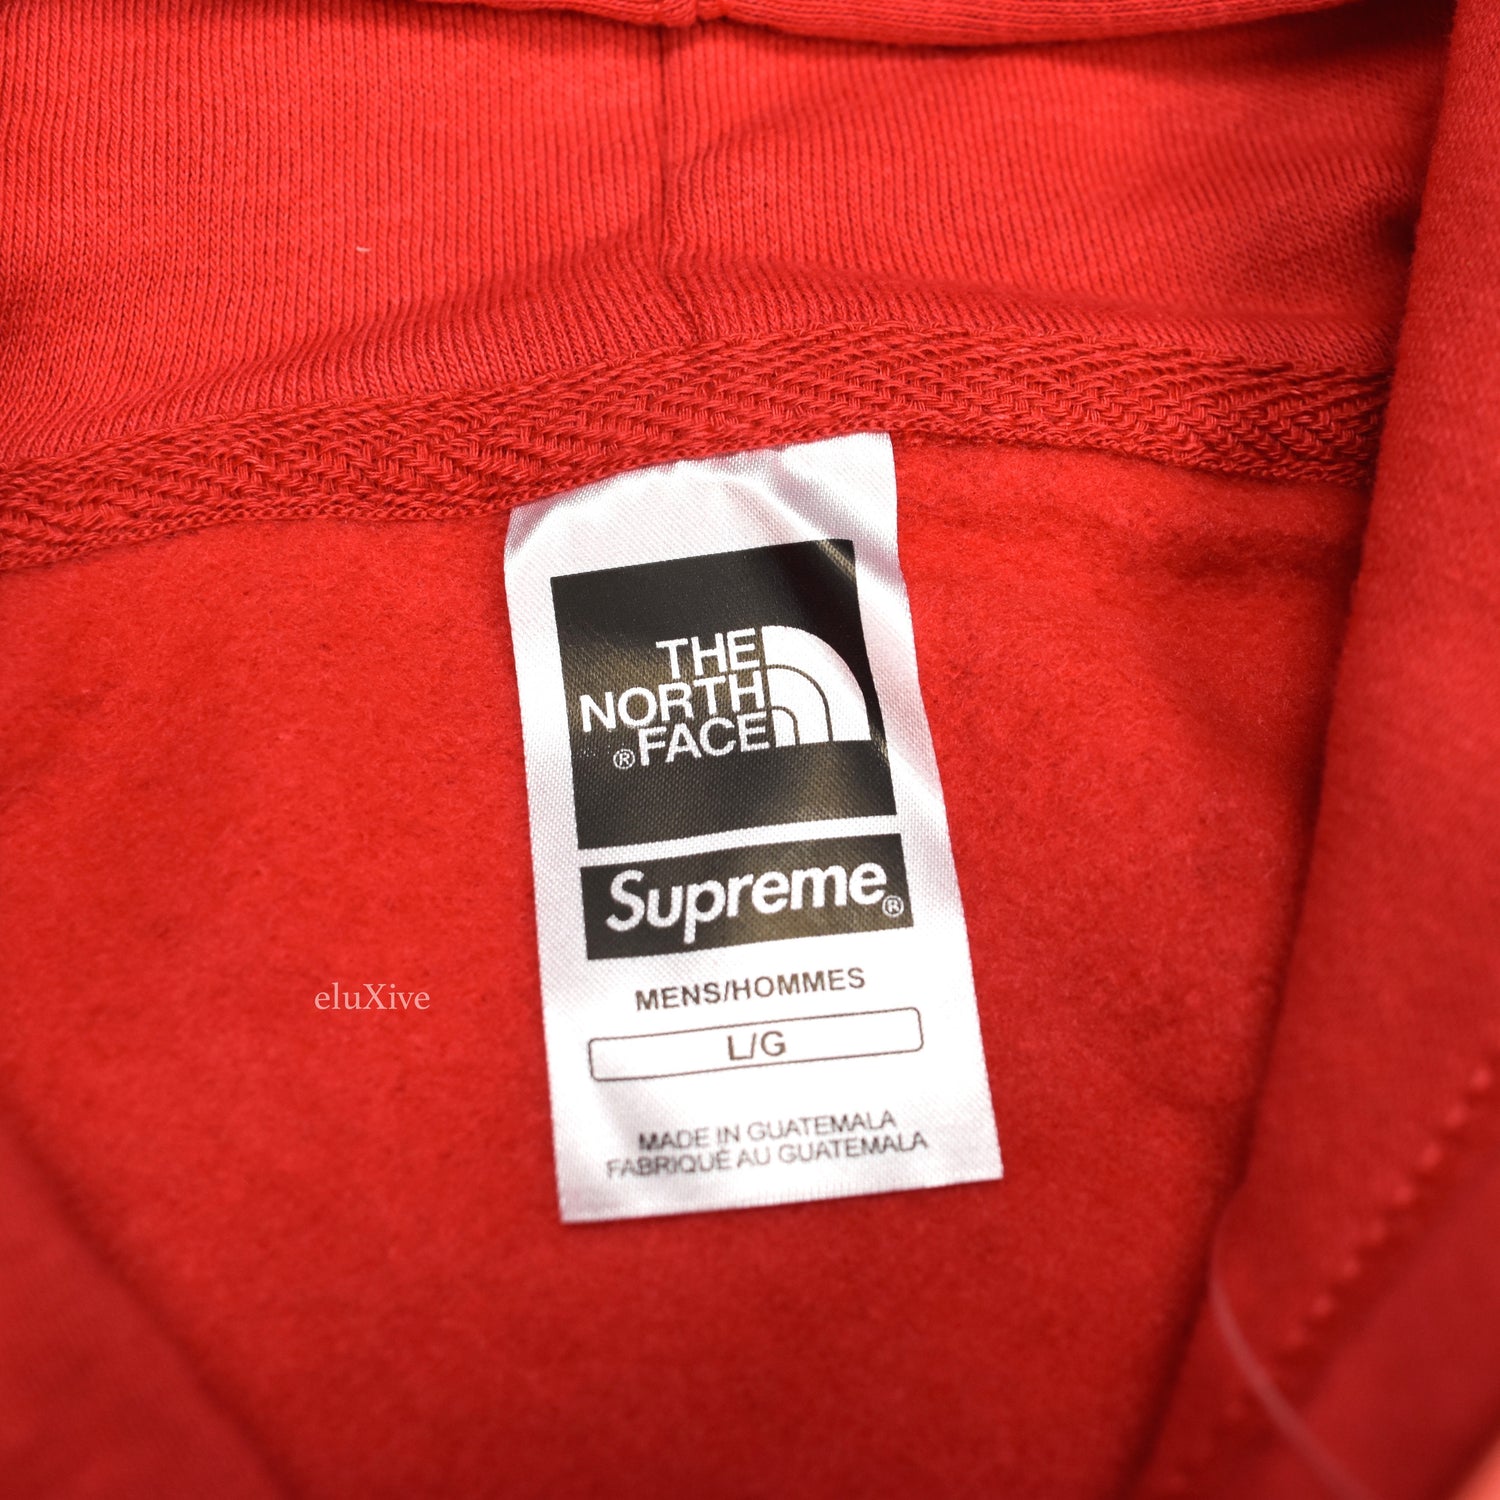 Buy Supreme x The North Face Photo Hooded Sweatshirt 'Red' - FW18SW5 RED